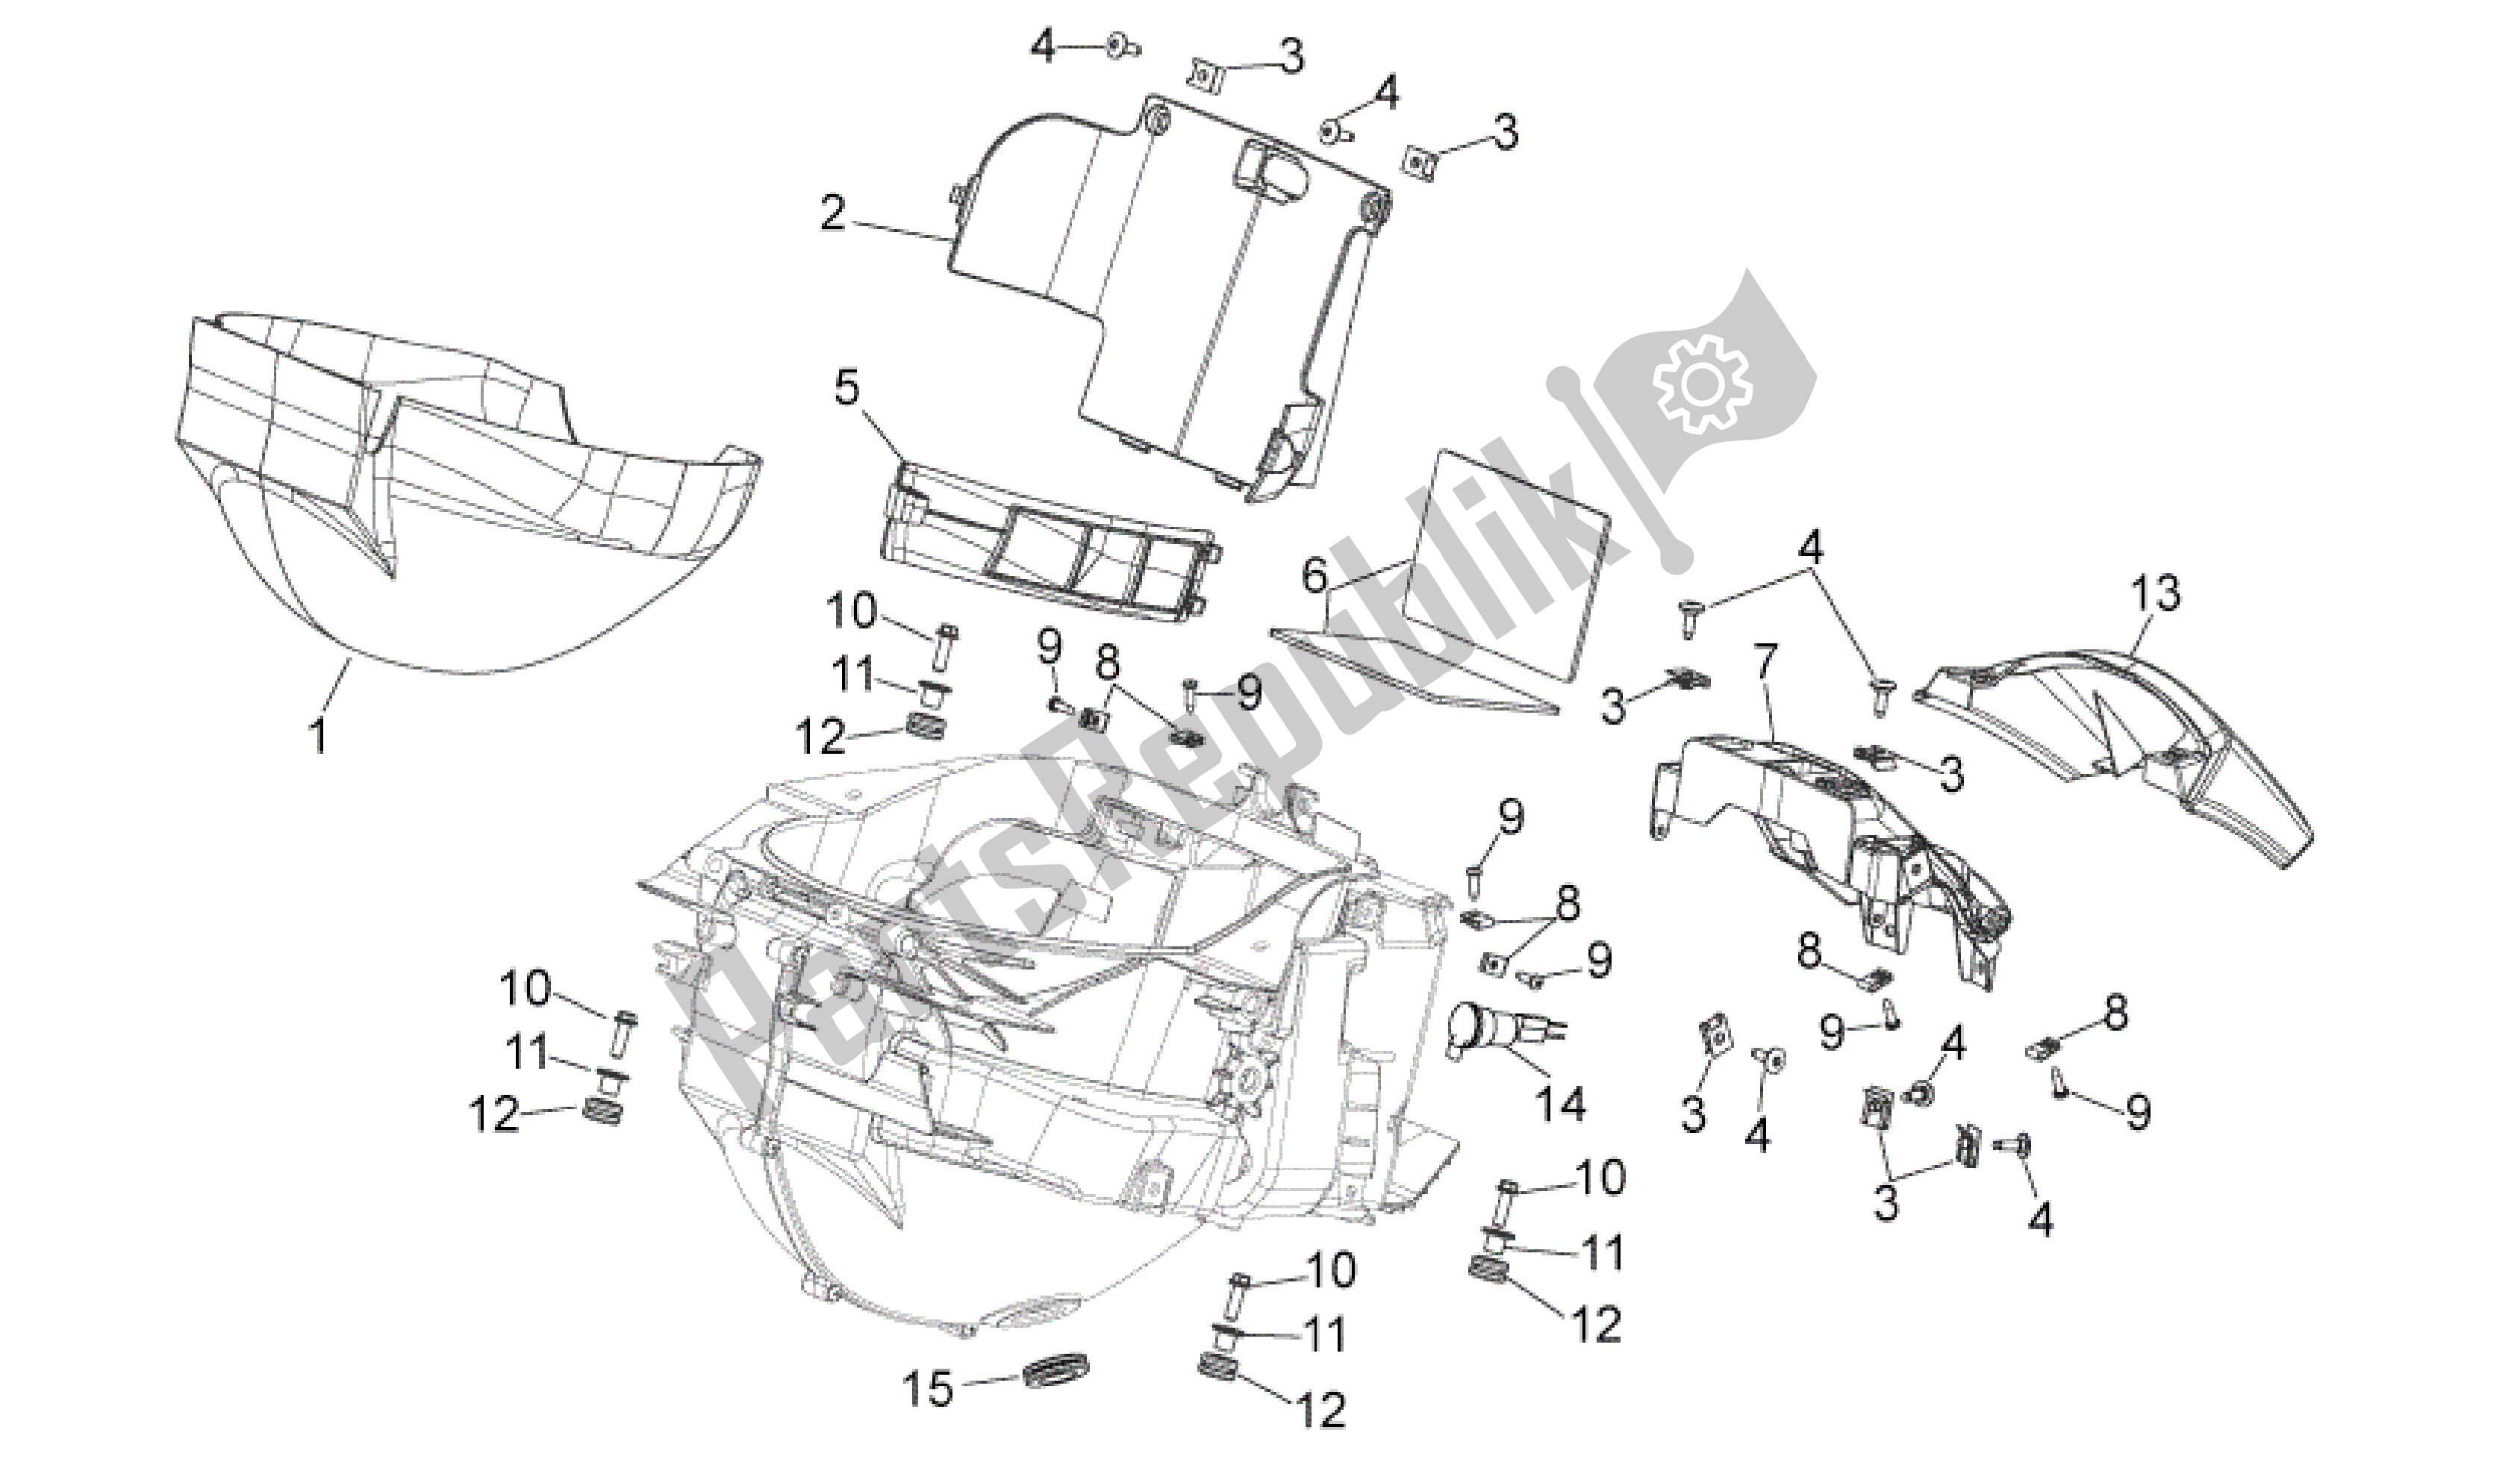 All parts for the Central Body Ii of the Aprilia Mana 850 2009 - 2011